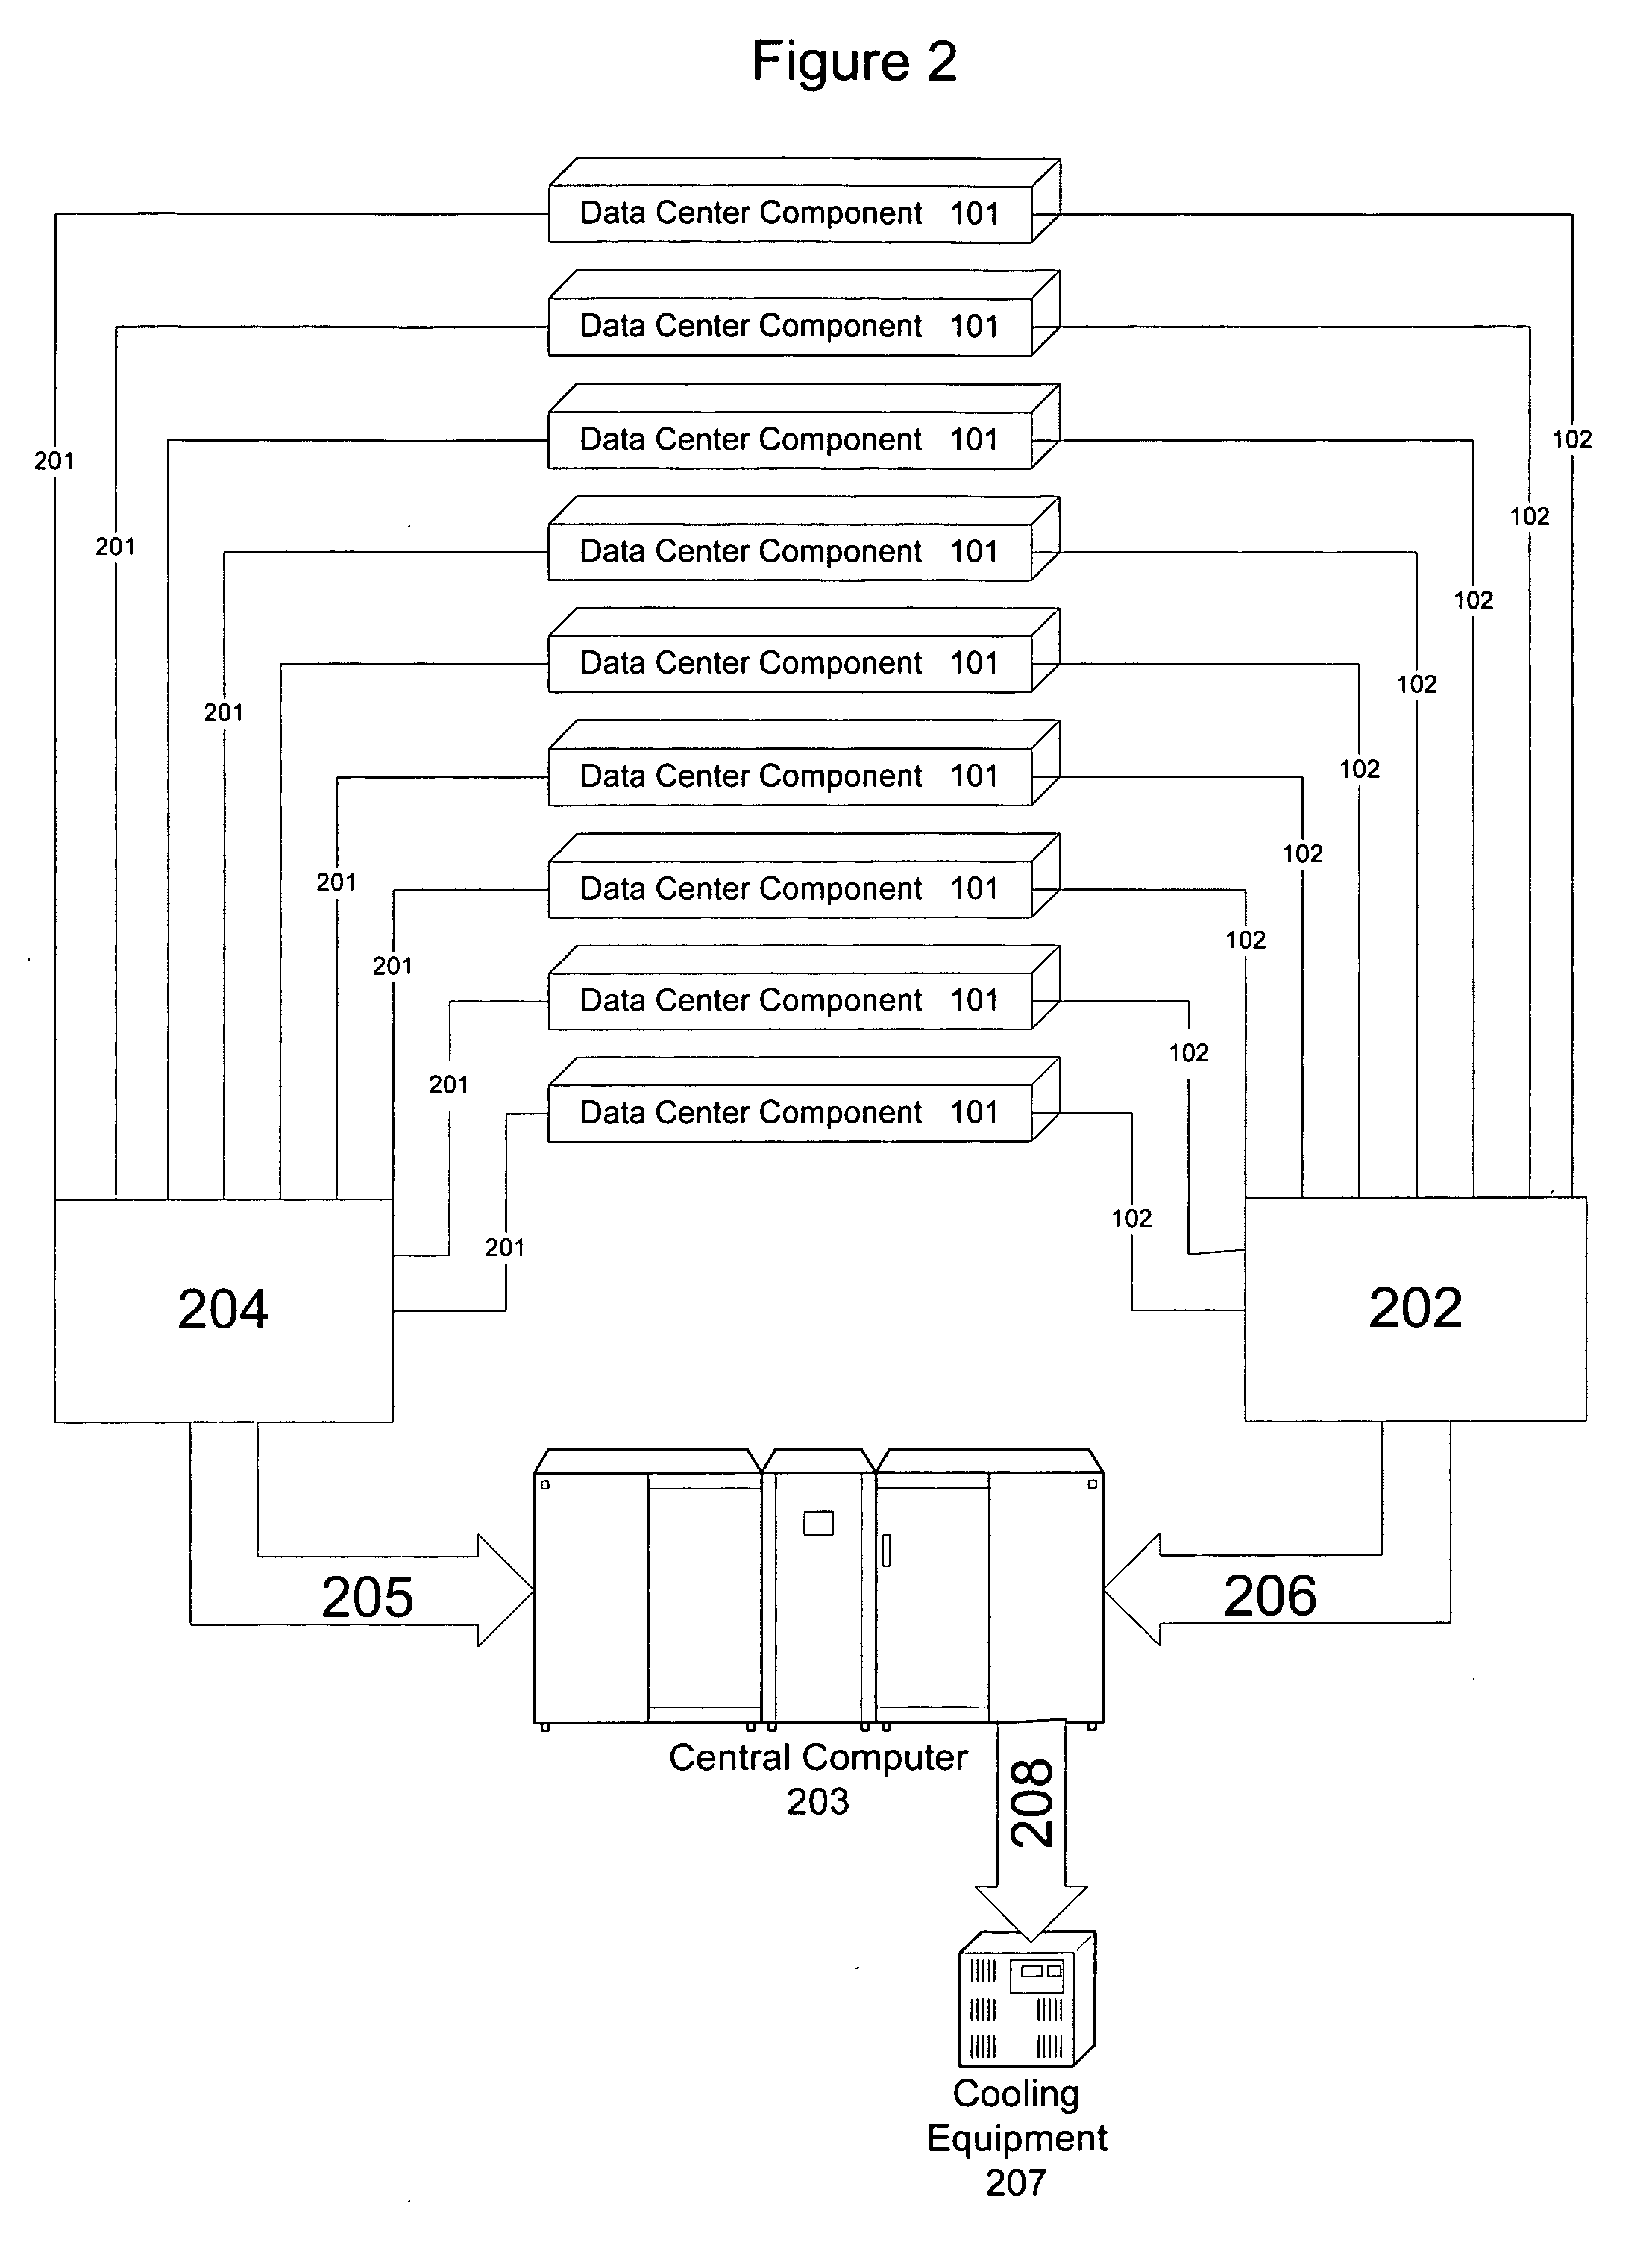 Method for dynamically reprovisioning applications and other server resources in a computer center in response to power and heat dissipation requirements